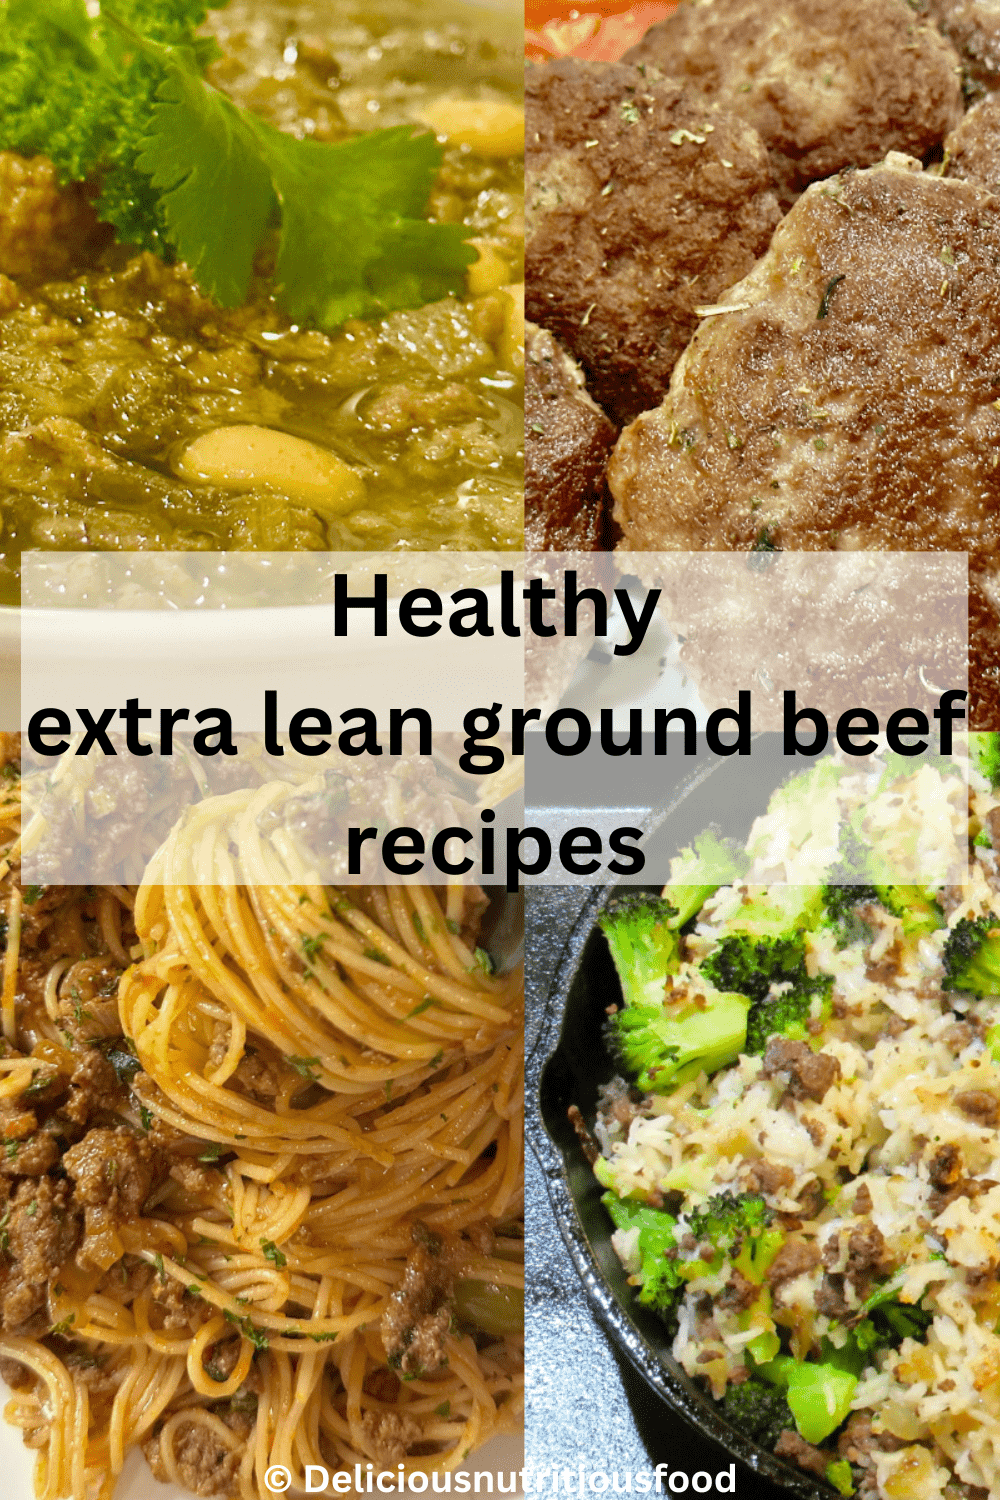 Healthy extra lean ground beef recipes